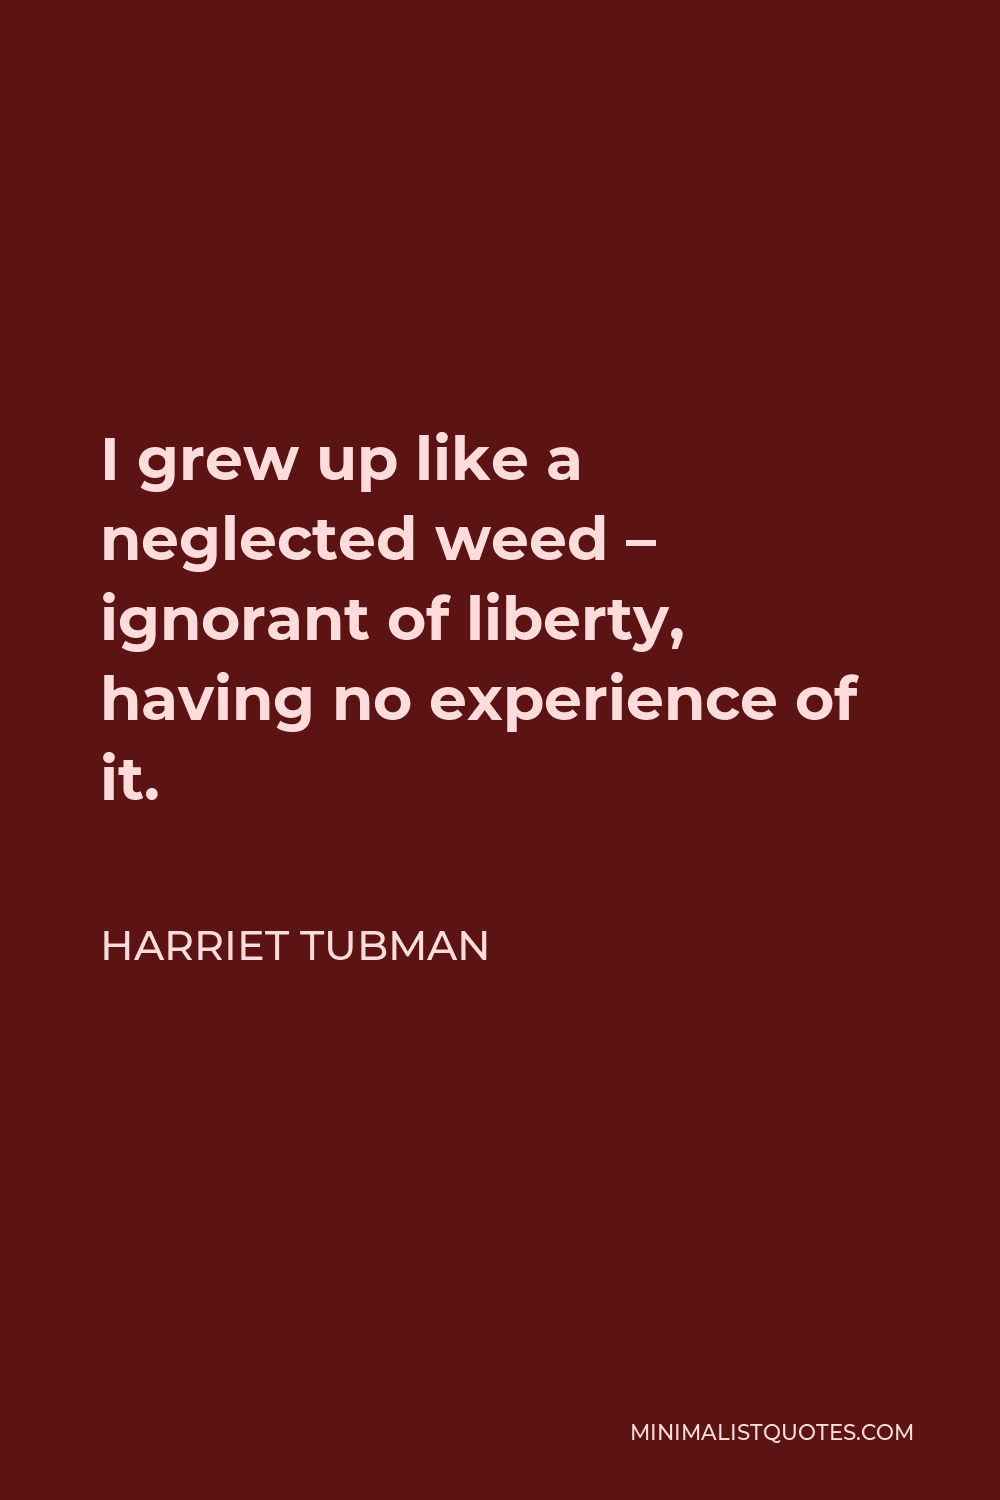 Harriet Tubman Quote - I grew up like a neglected weed – ignorant of liberty, having no experience of it.